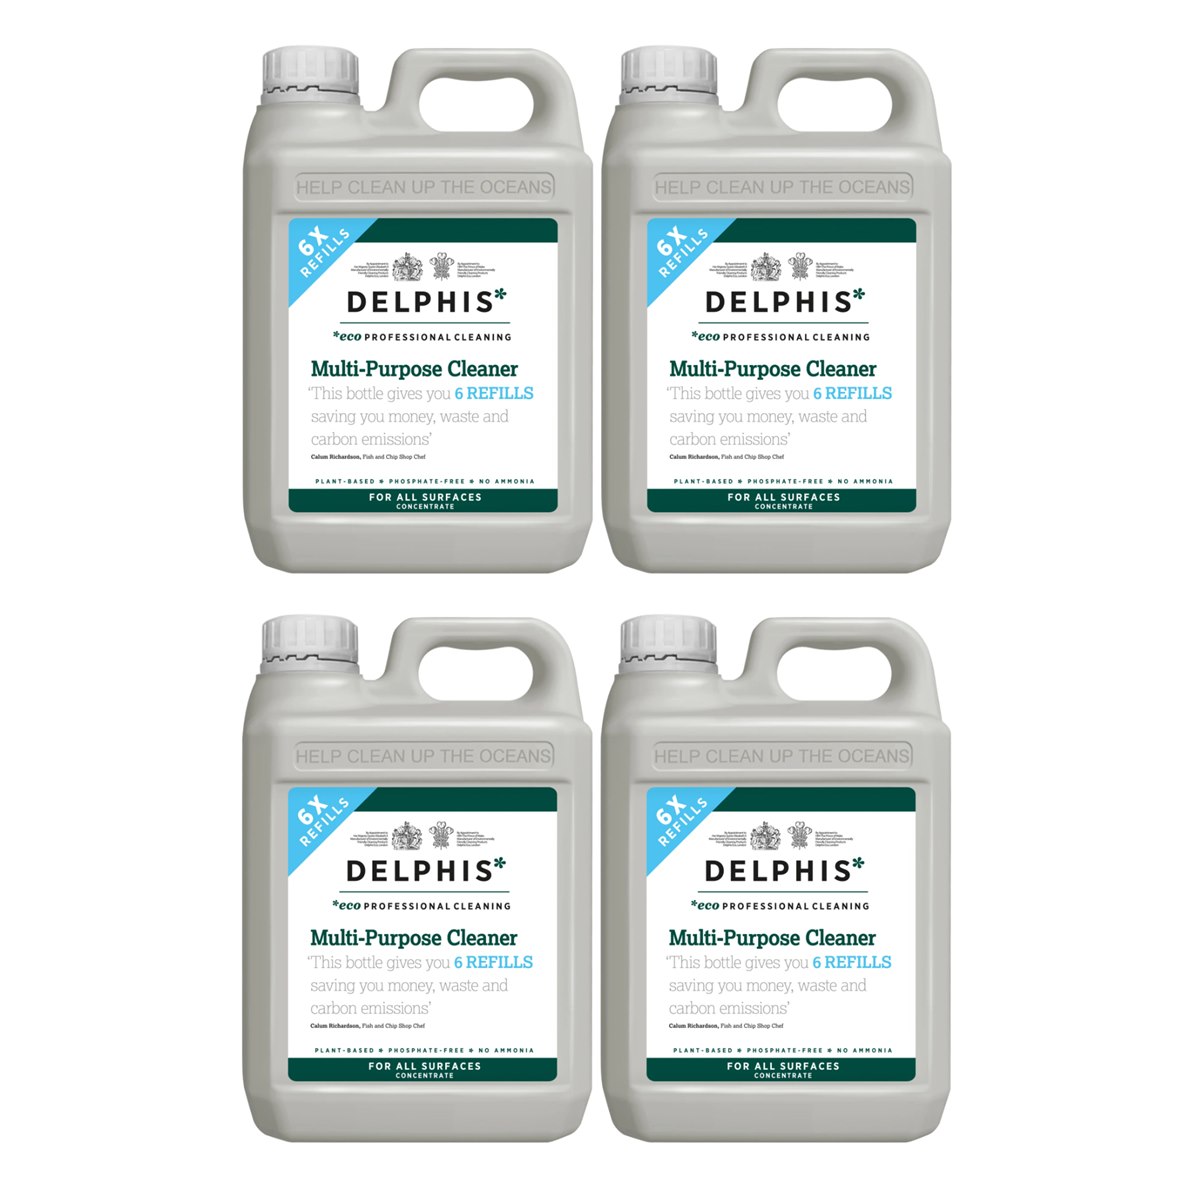 Case of 4 x Delphis Eco Professional Cleaning Multi-Purpose Cleaner Refill 2 Litre